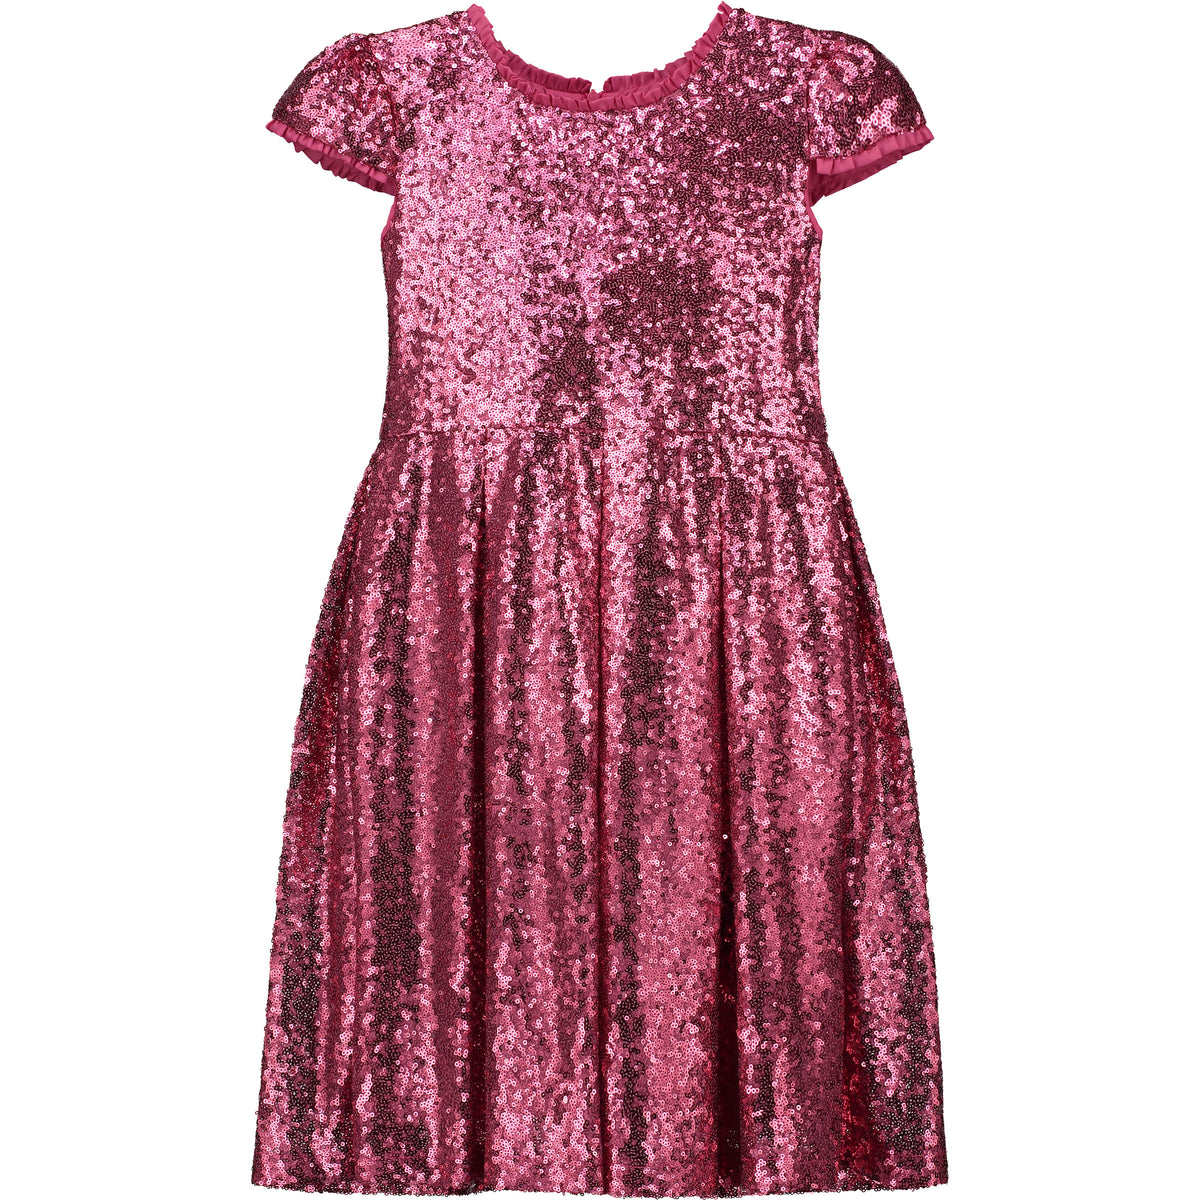 Dazzle Sequin Girls Party Dress, Candy Pink